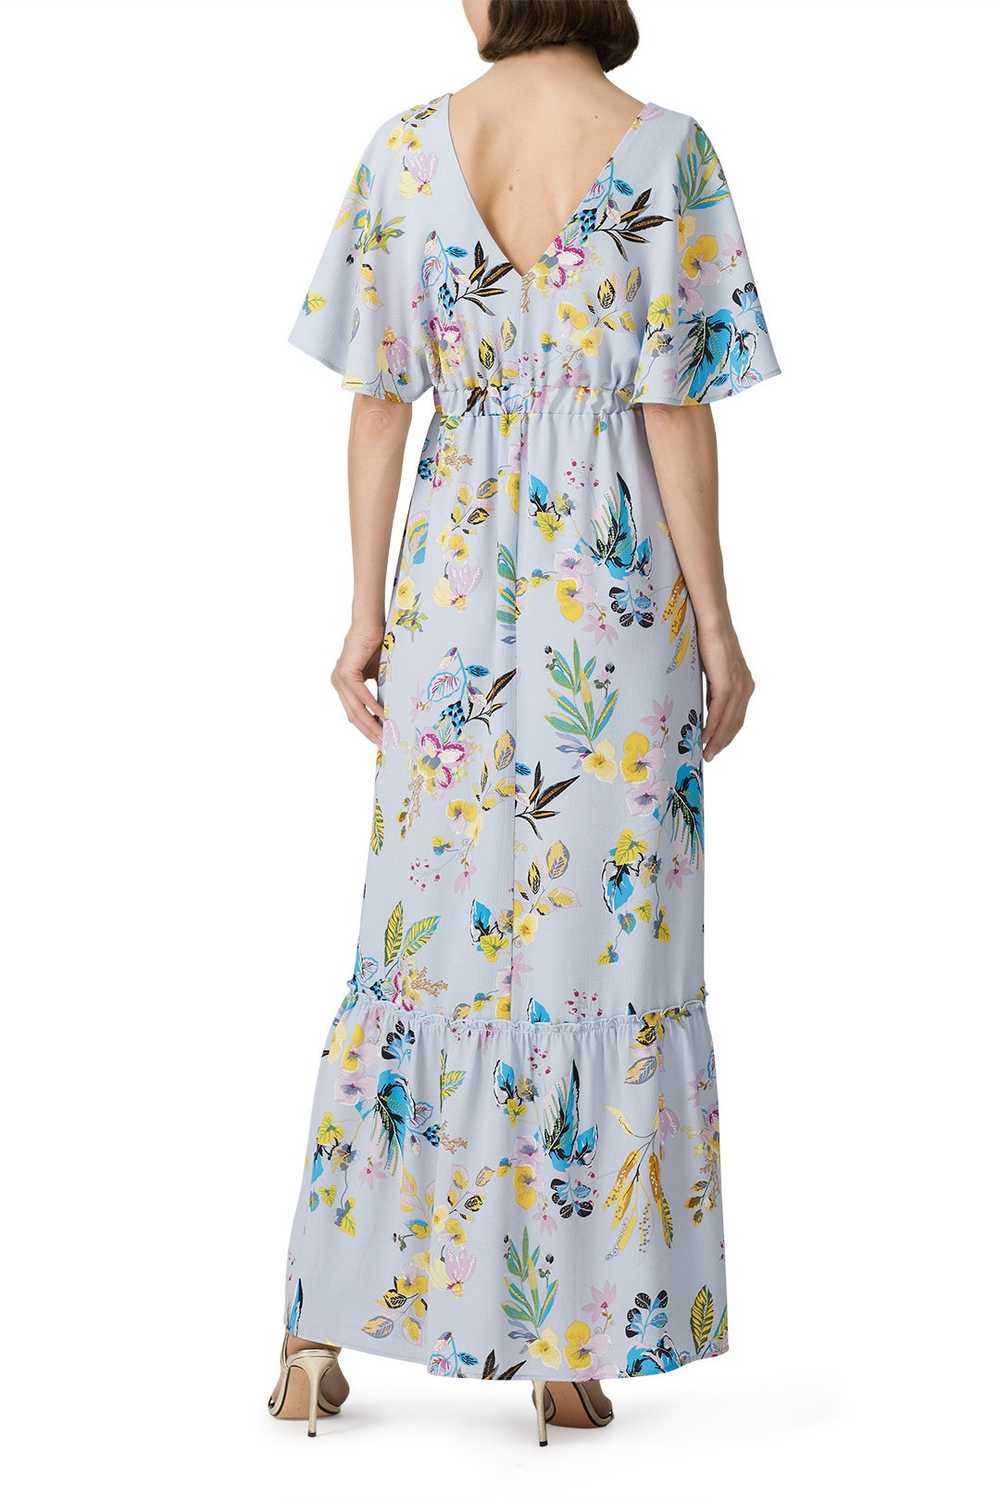 Slate & Willow Floral Dolman Maxi - image 2